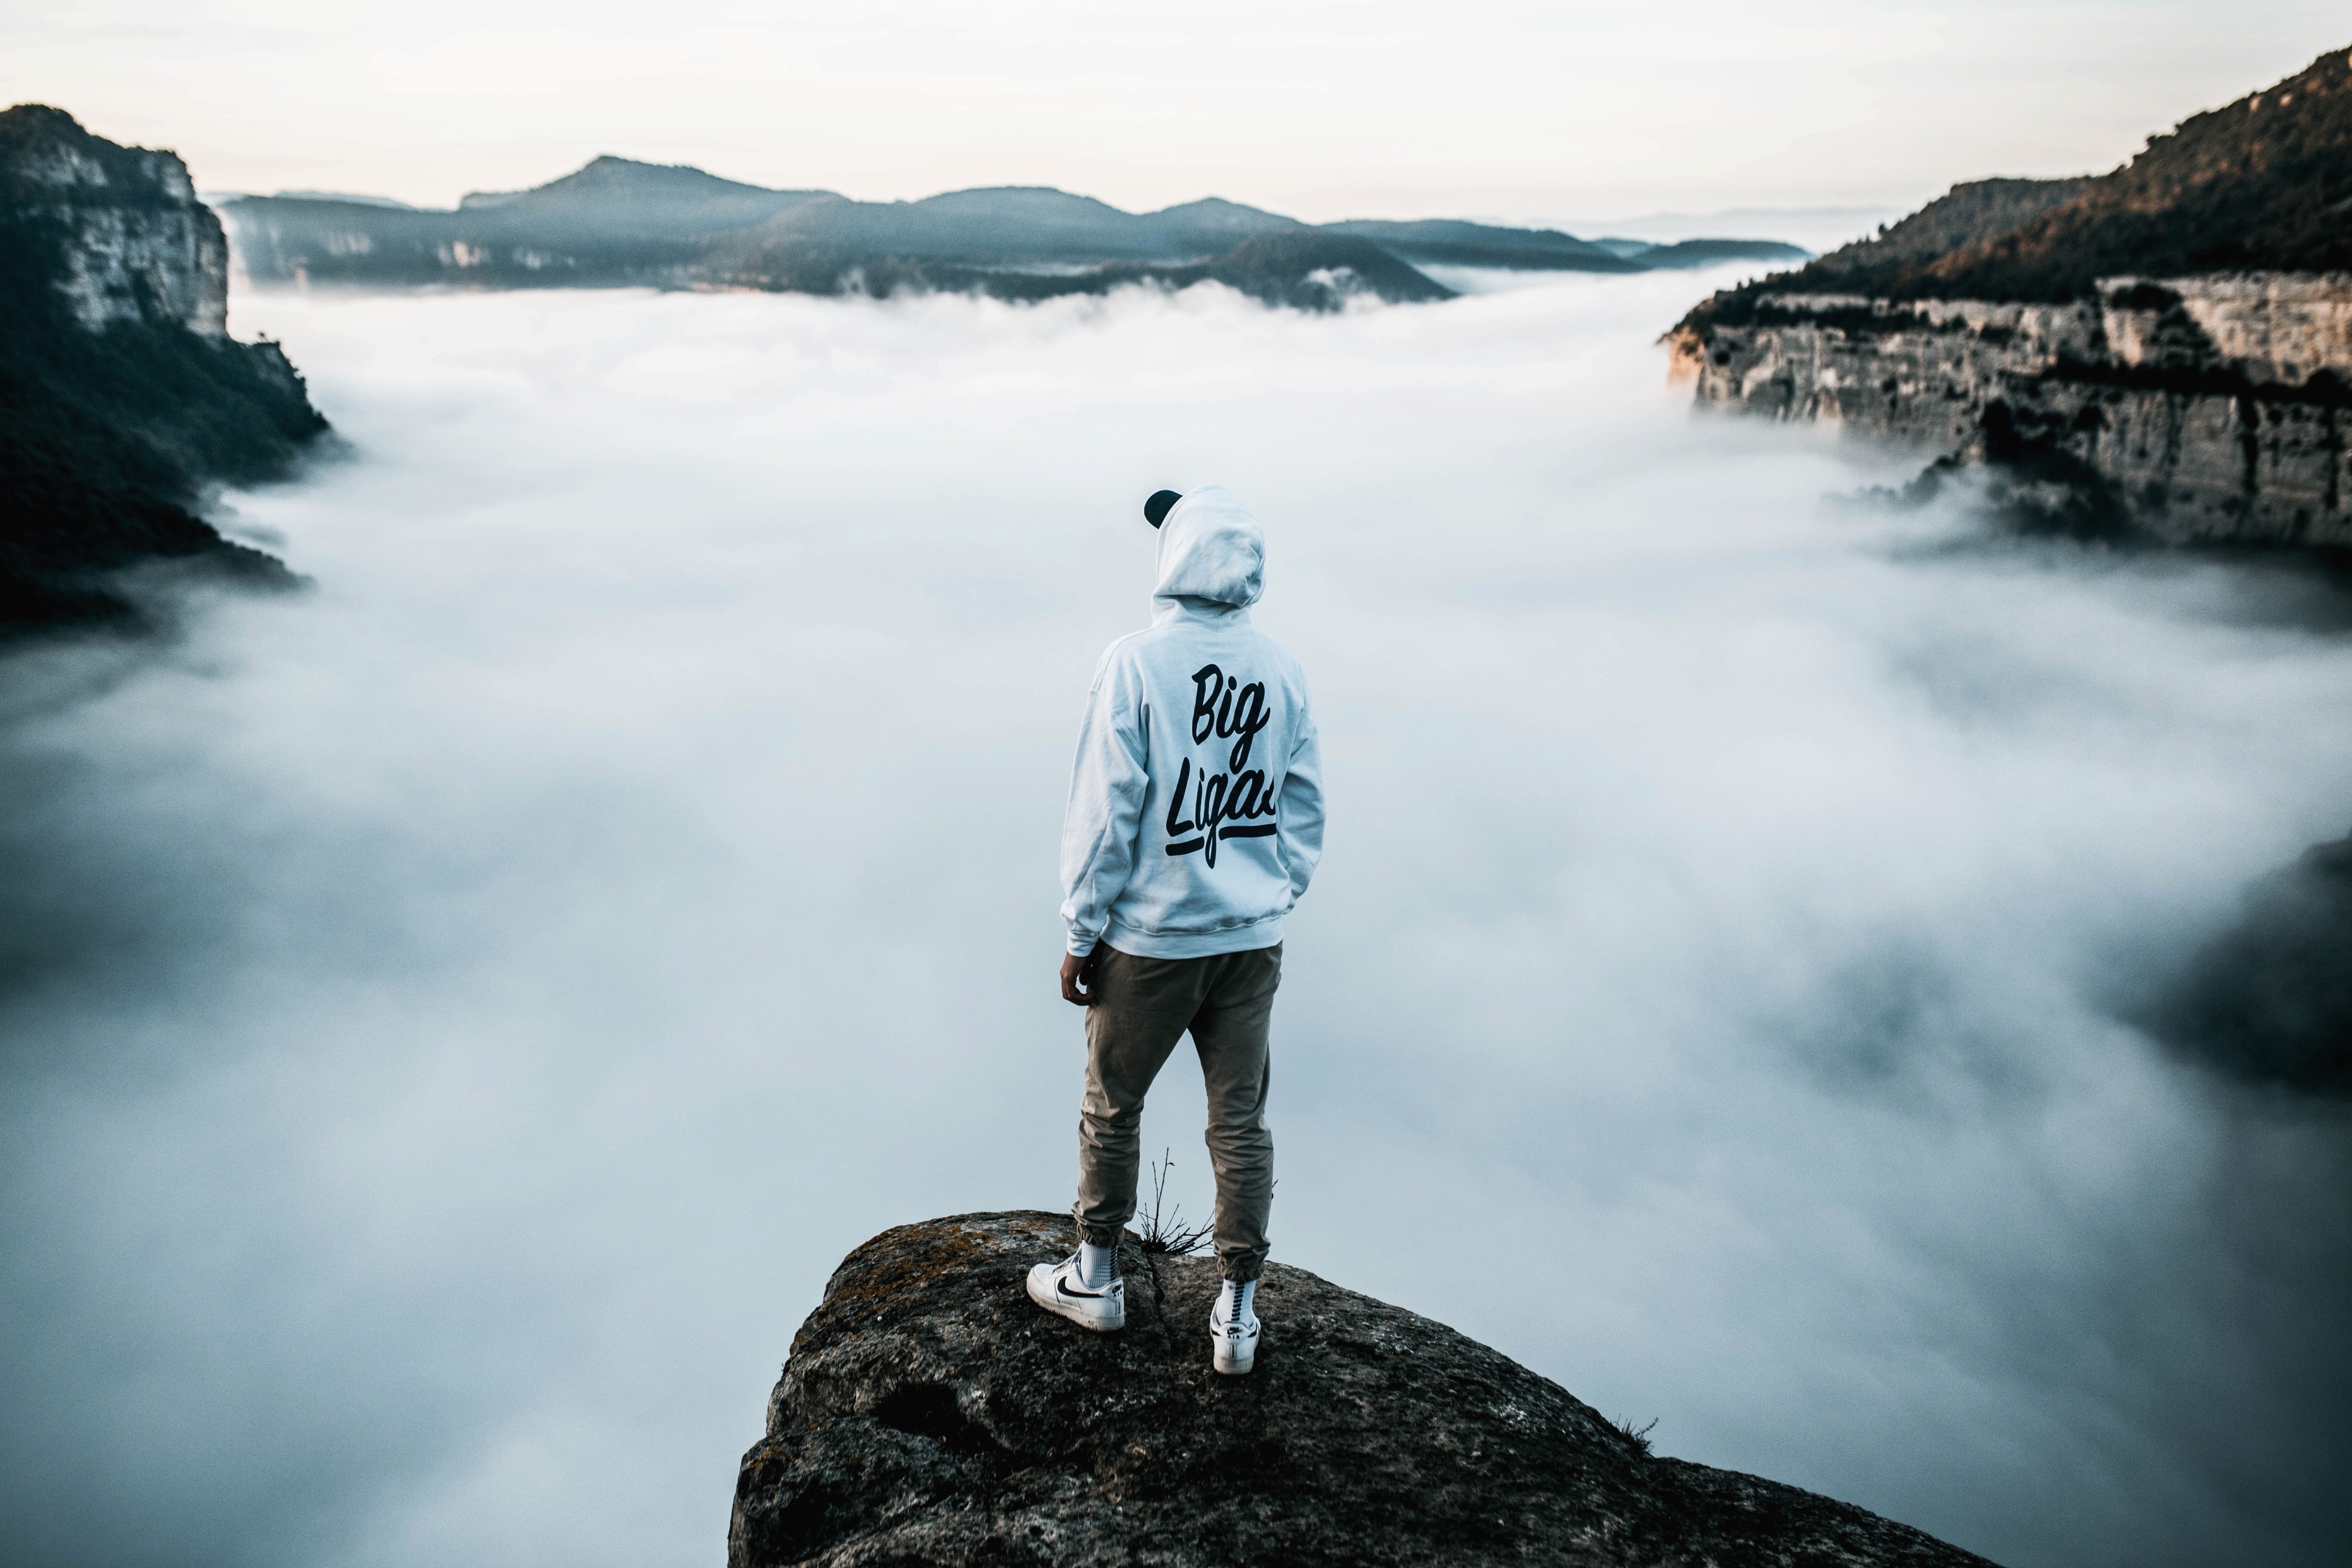 alone, loneliness, miscellaneous, miscellanea, sneakers, fog, cap, lonely